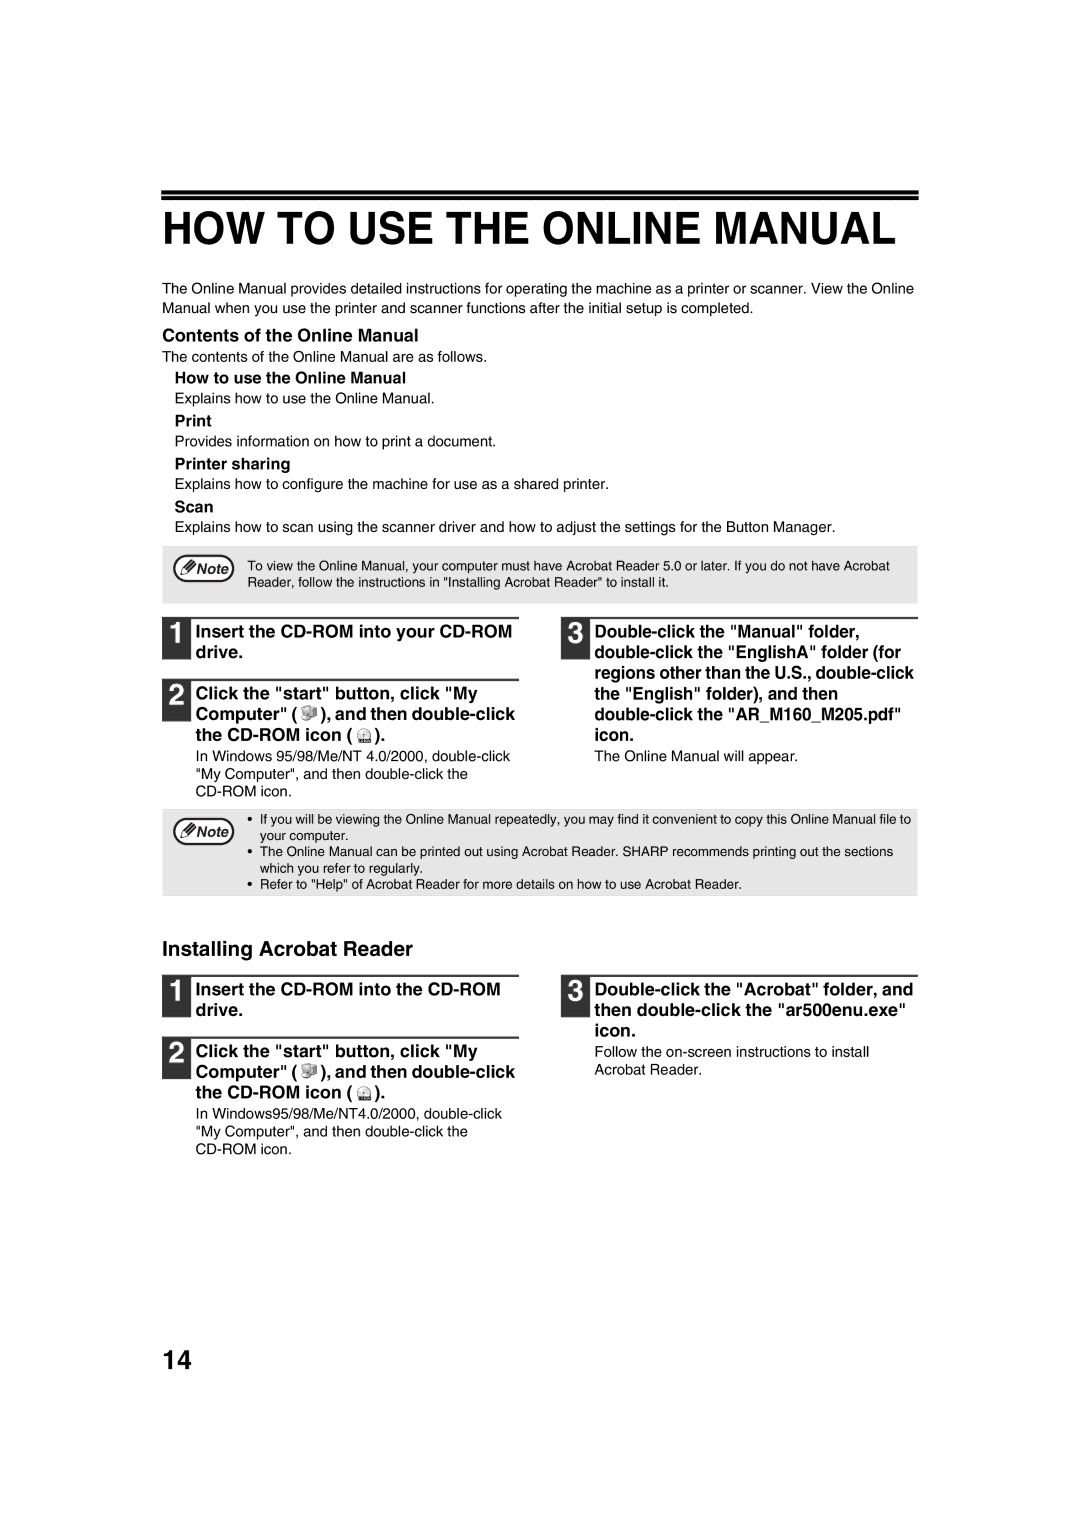 Sharp AR-M205, AR-M160 setup guide HOW to USE the Online Manual, Installing Acrobat Reader, Contents of the Online Manual 